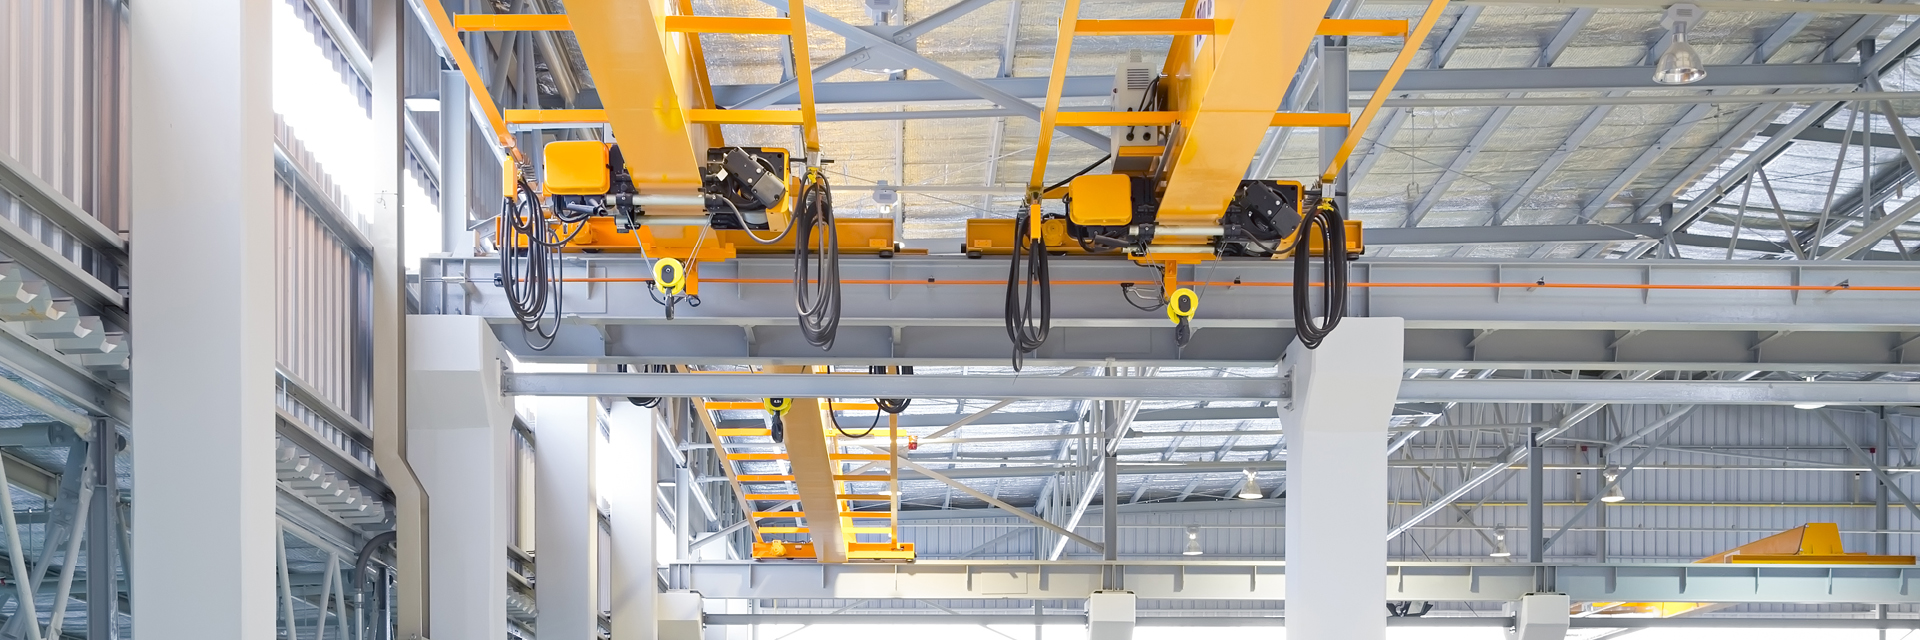 Yellow crane system in industrial hall